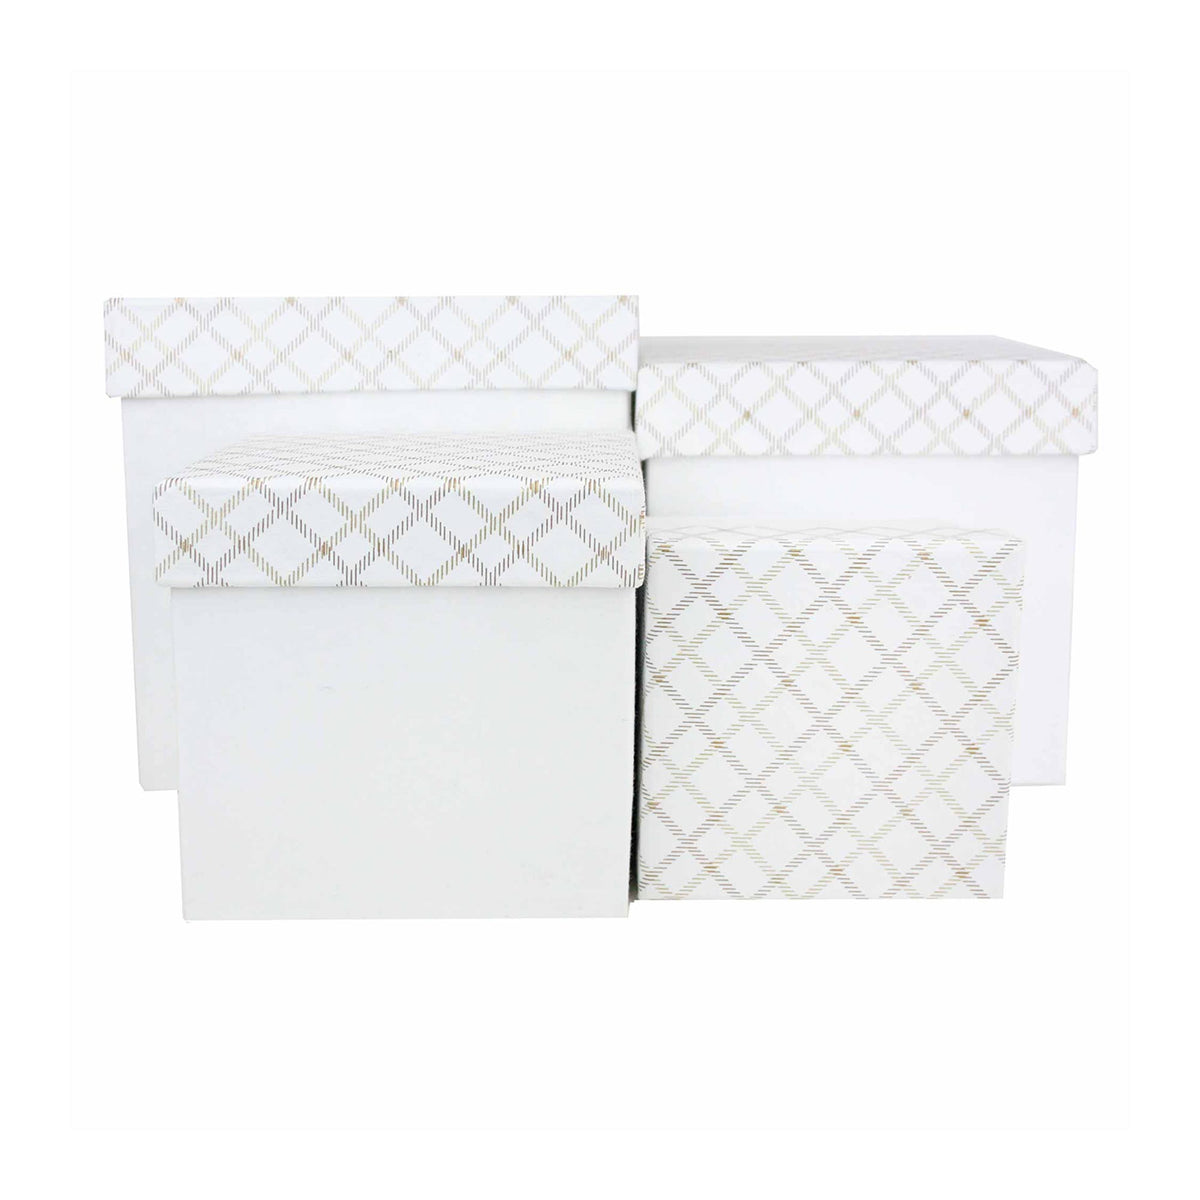 Handcrafted Chequered White Gift Boxes - Set of 4